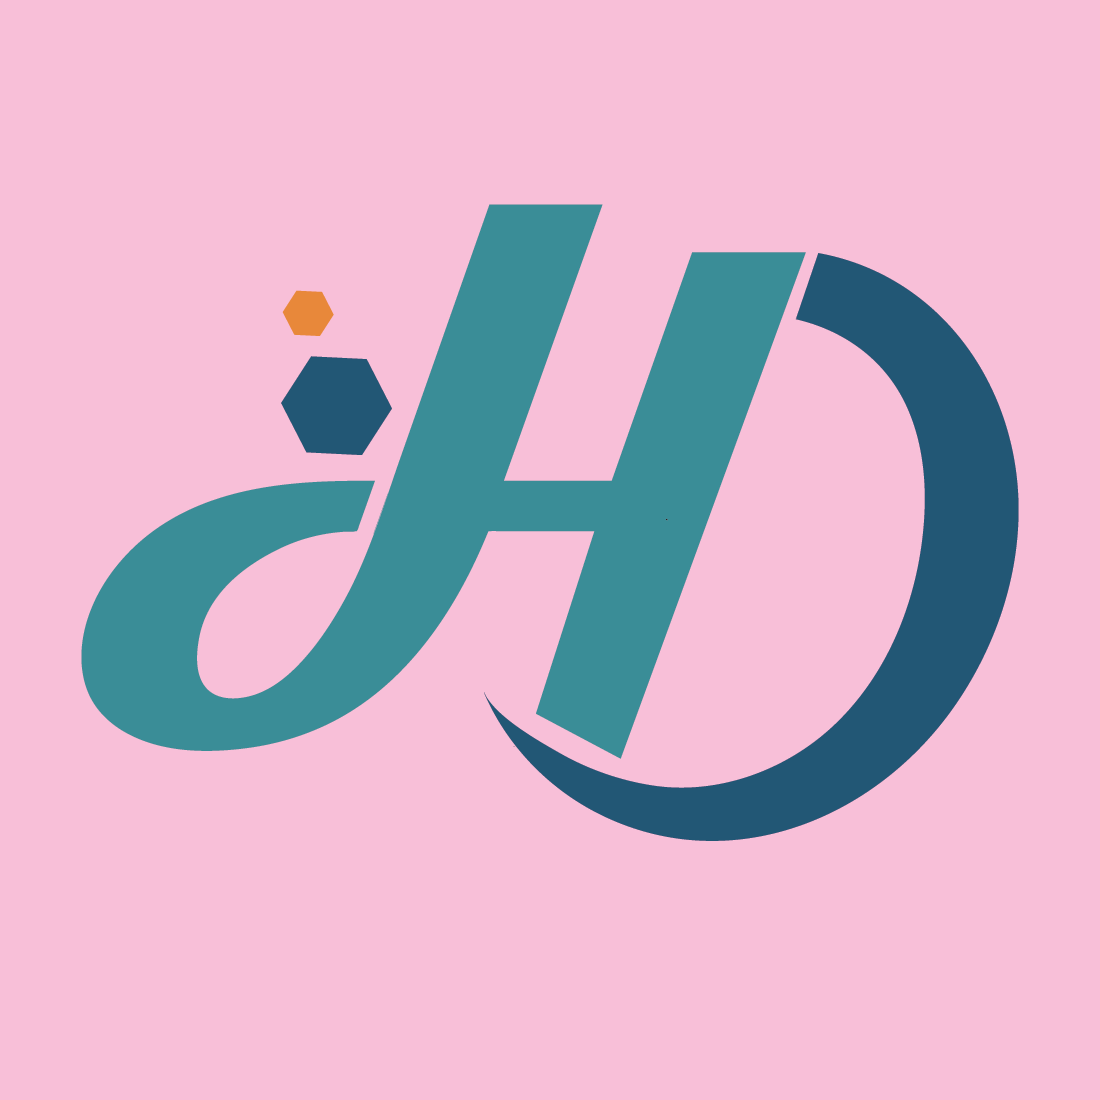 DH logo Design For your business by Branding_Design4 on Dribbble